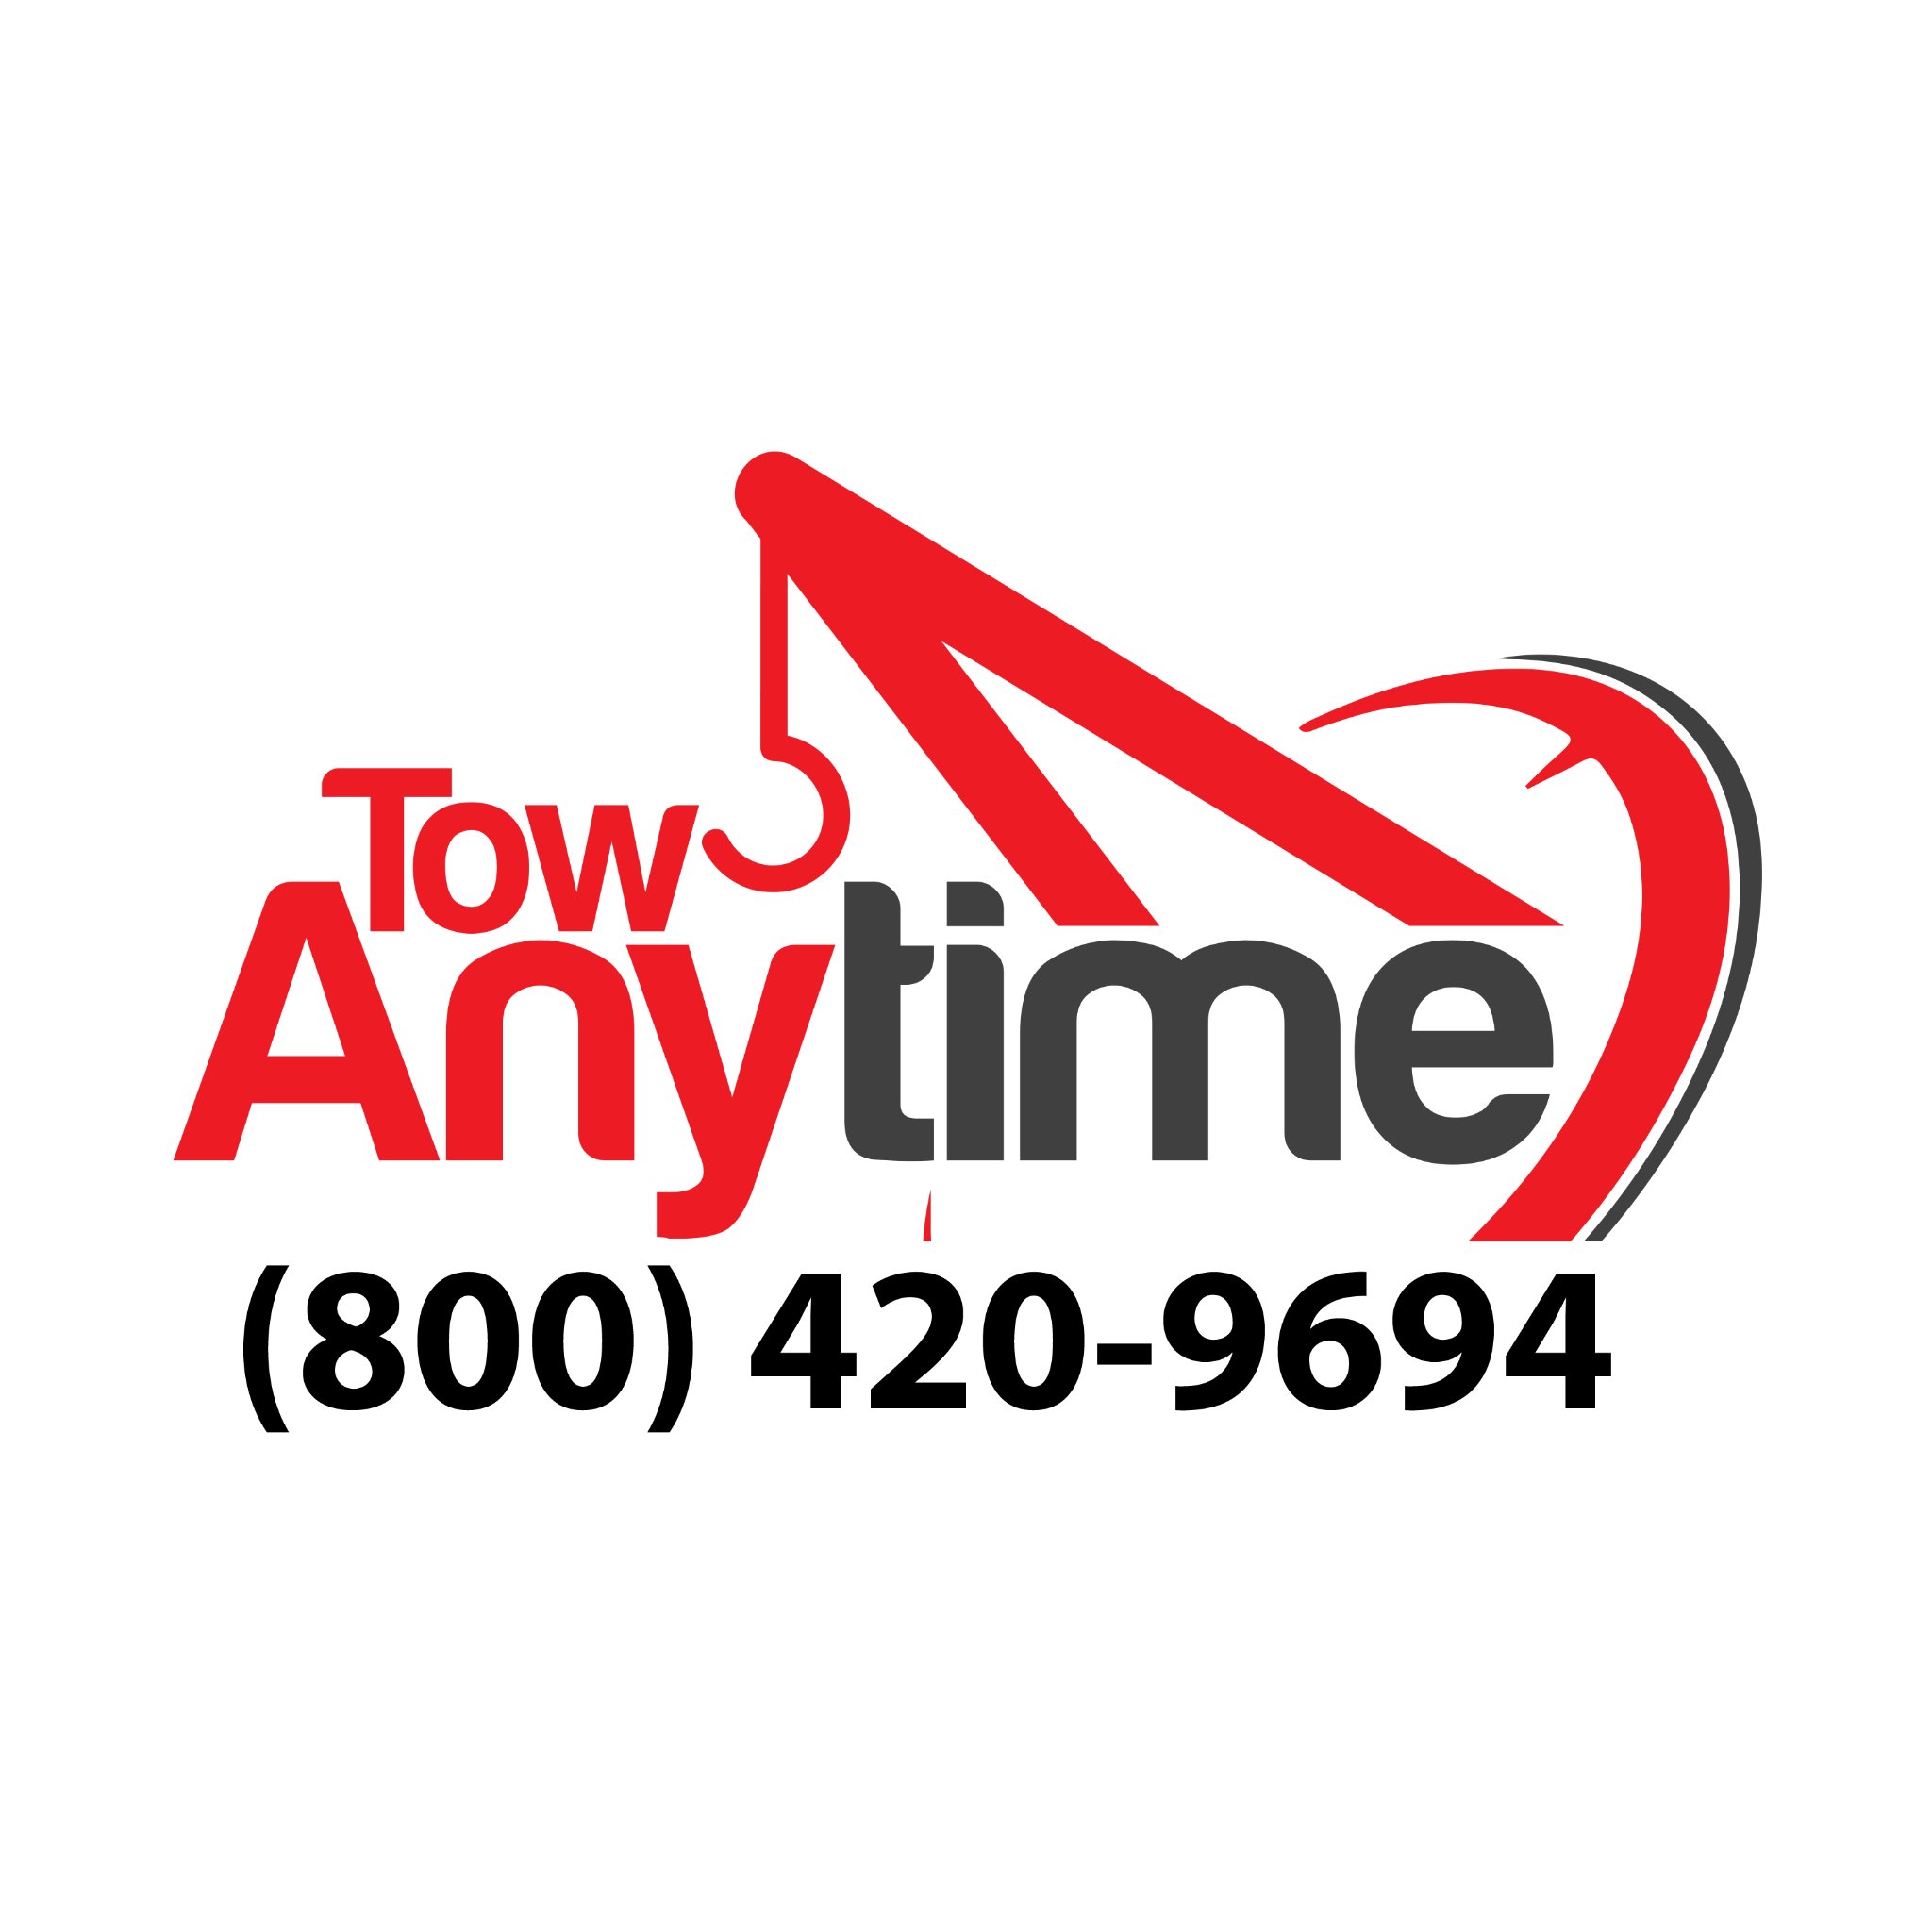 Tow Anytime is a service that uses one single phone number to dial multiple tow truck drivers in your stranded area simultaneously for FREE!